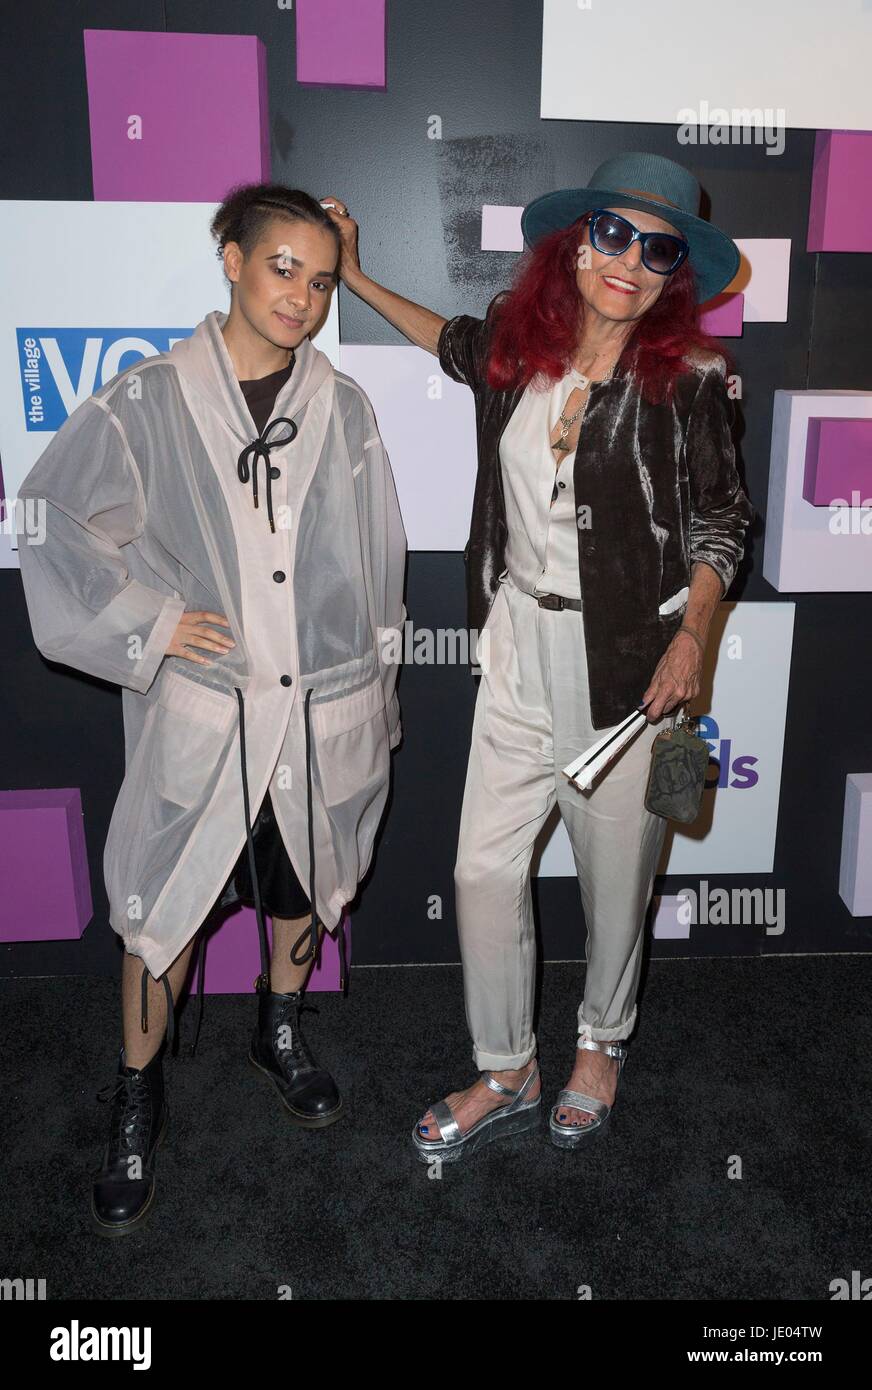 New York, NY, USA. 21st June, 2017. Tyler Ford, Patricia Field at arrivals for The Village Voice Pride Awards, Capitale, New York, NY June 21, 2017. Credit: Lev Radin/Everett Collection/Alamy Live News Stock Photo